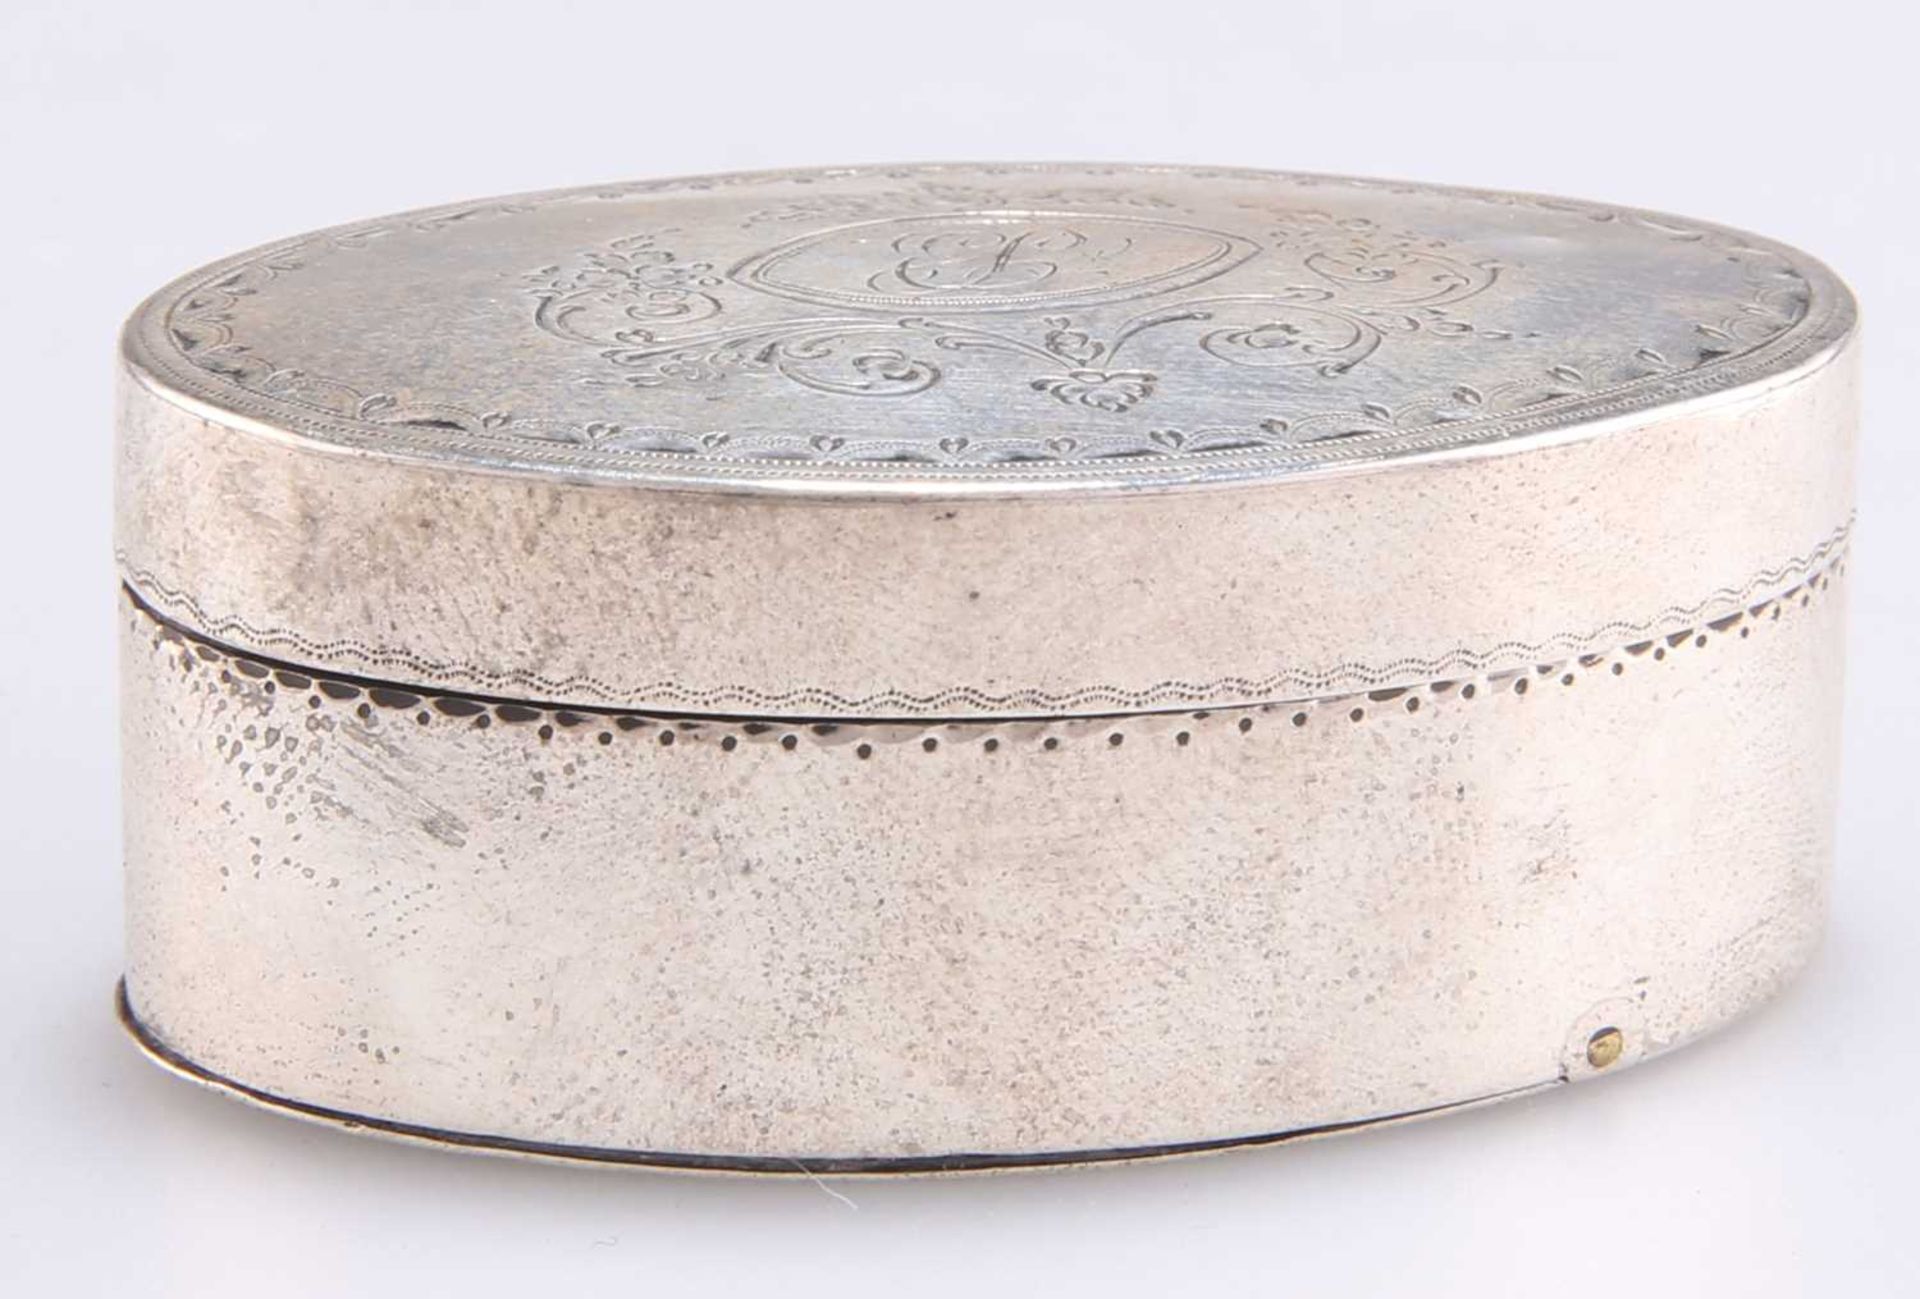 A GEORGE III LARGE SILVER NUTMEG GRATER - Image 2 of 4